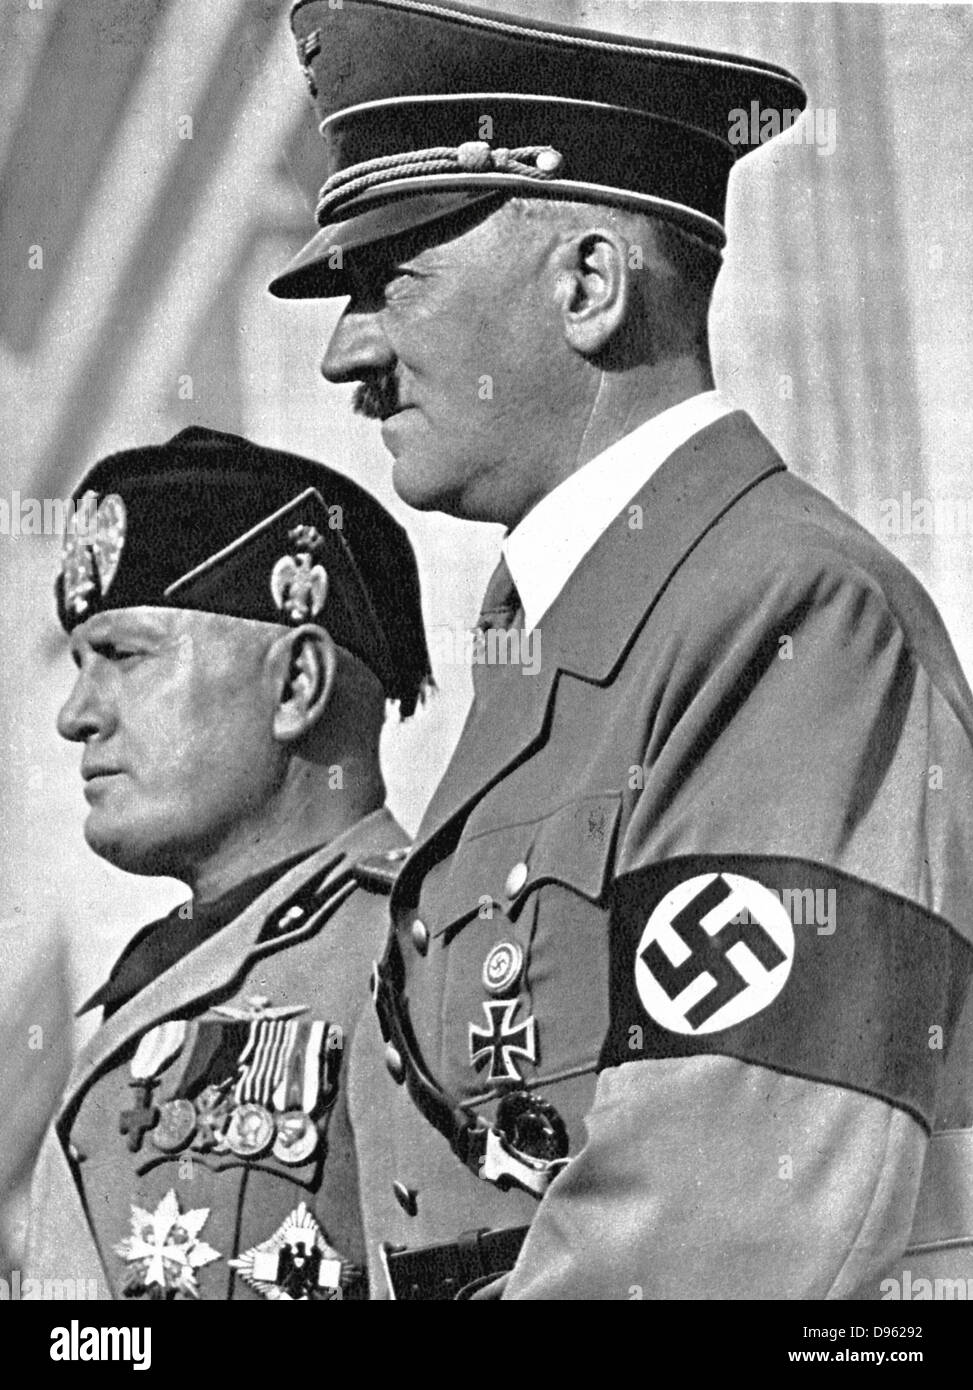 Adolph Hitler (1889-1945) and Benito Mussolini (1883-1945), German and Italian fascist dictators. Stock Photo